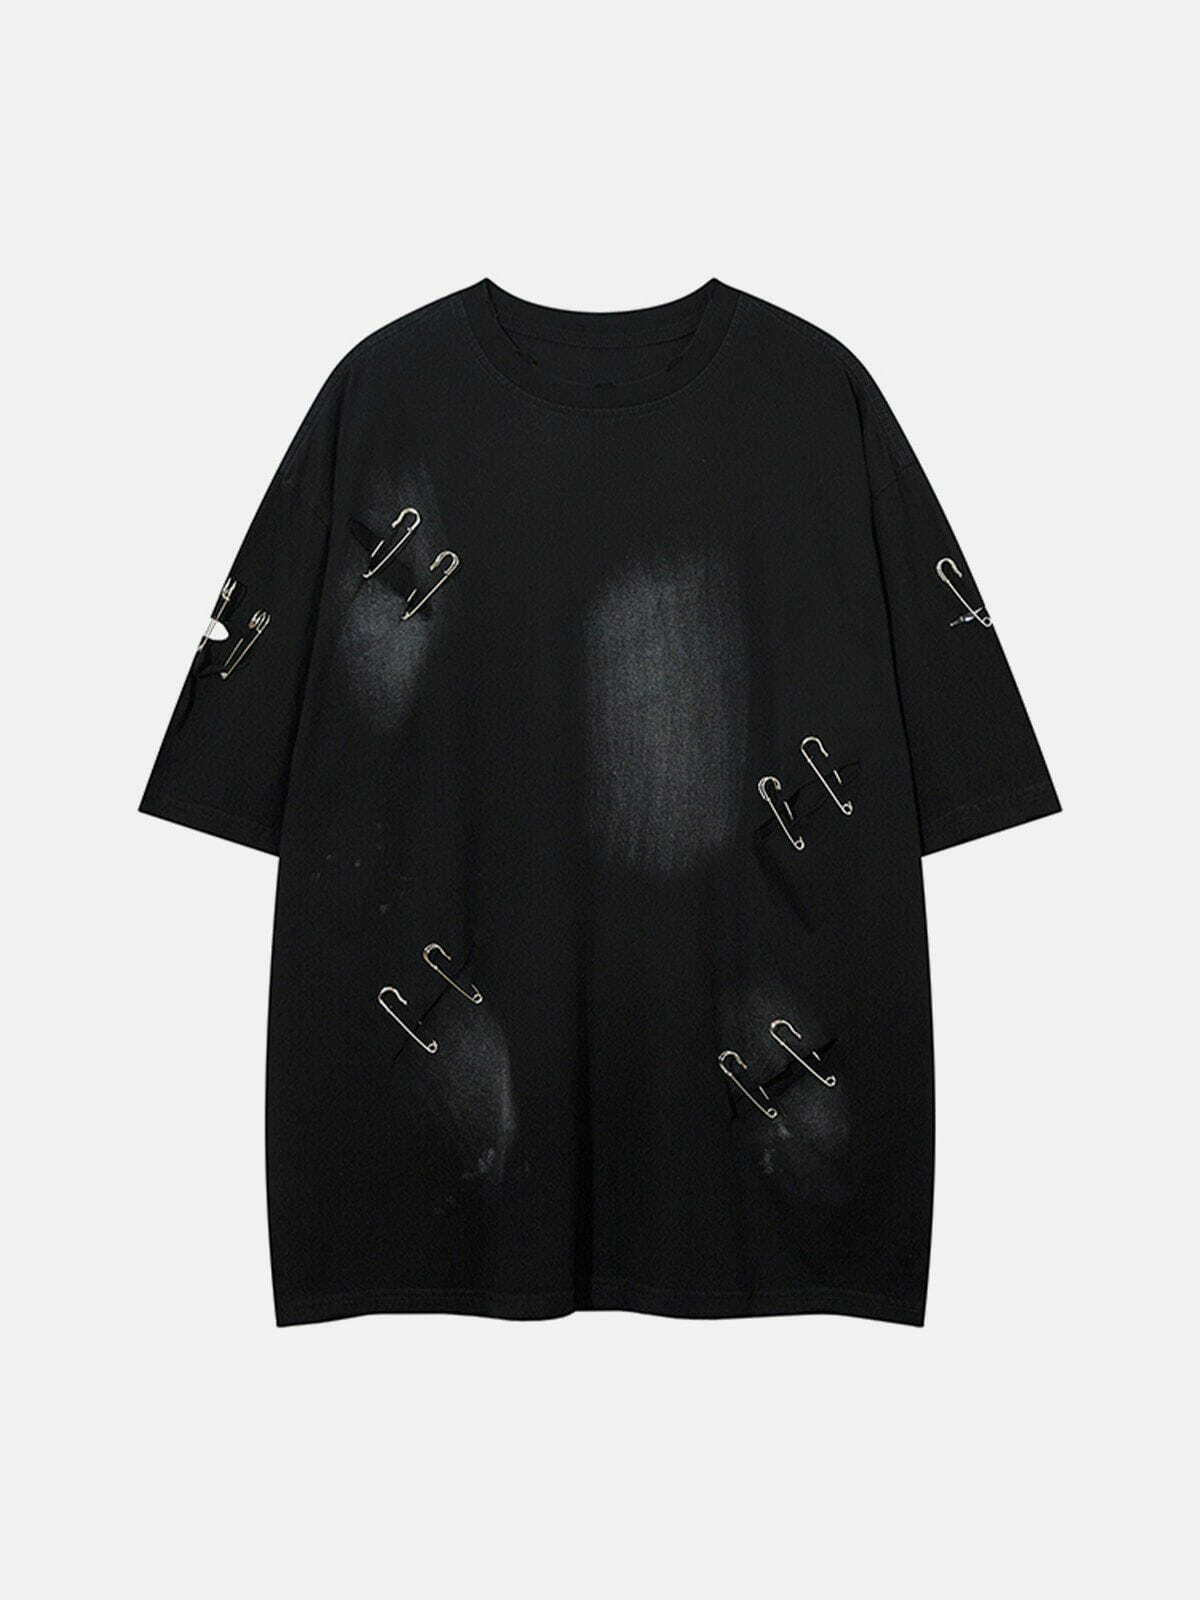 washed holes distressed tee edgy streetwear essential 1918